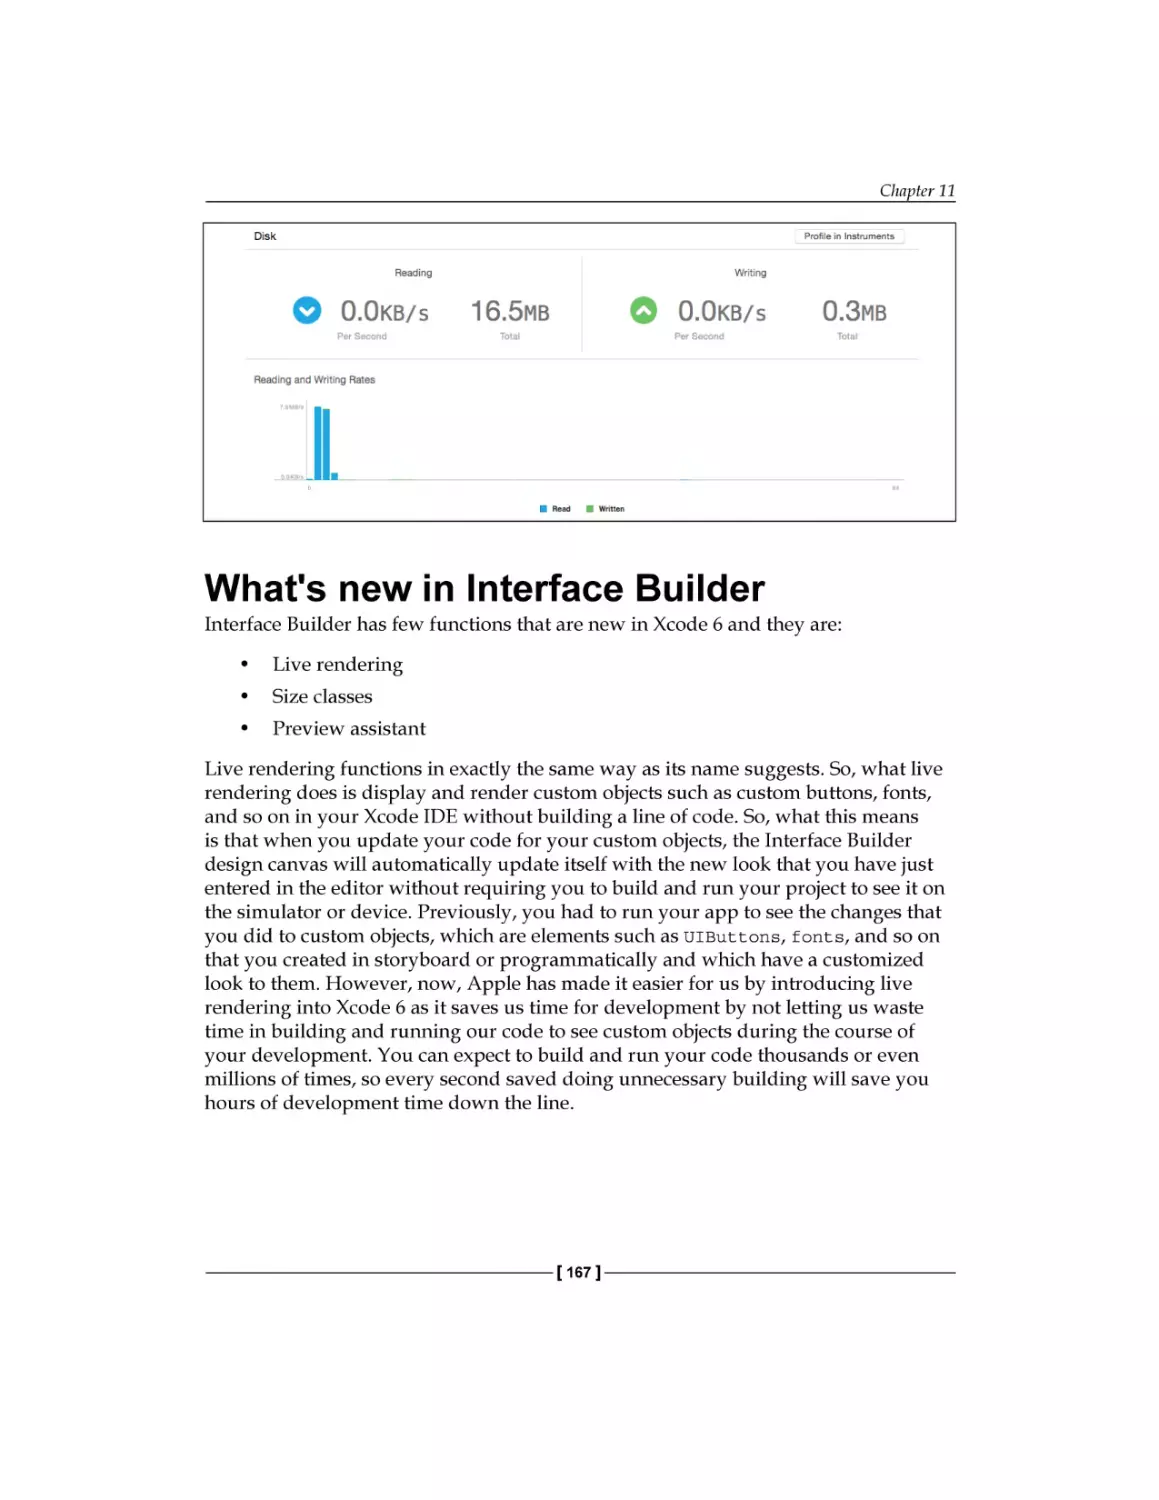 What's new in Interface Builder